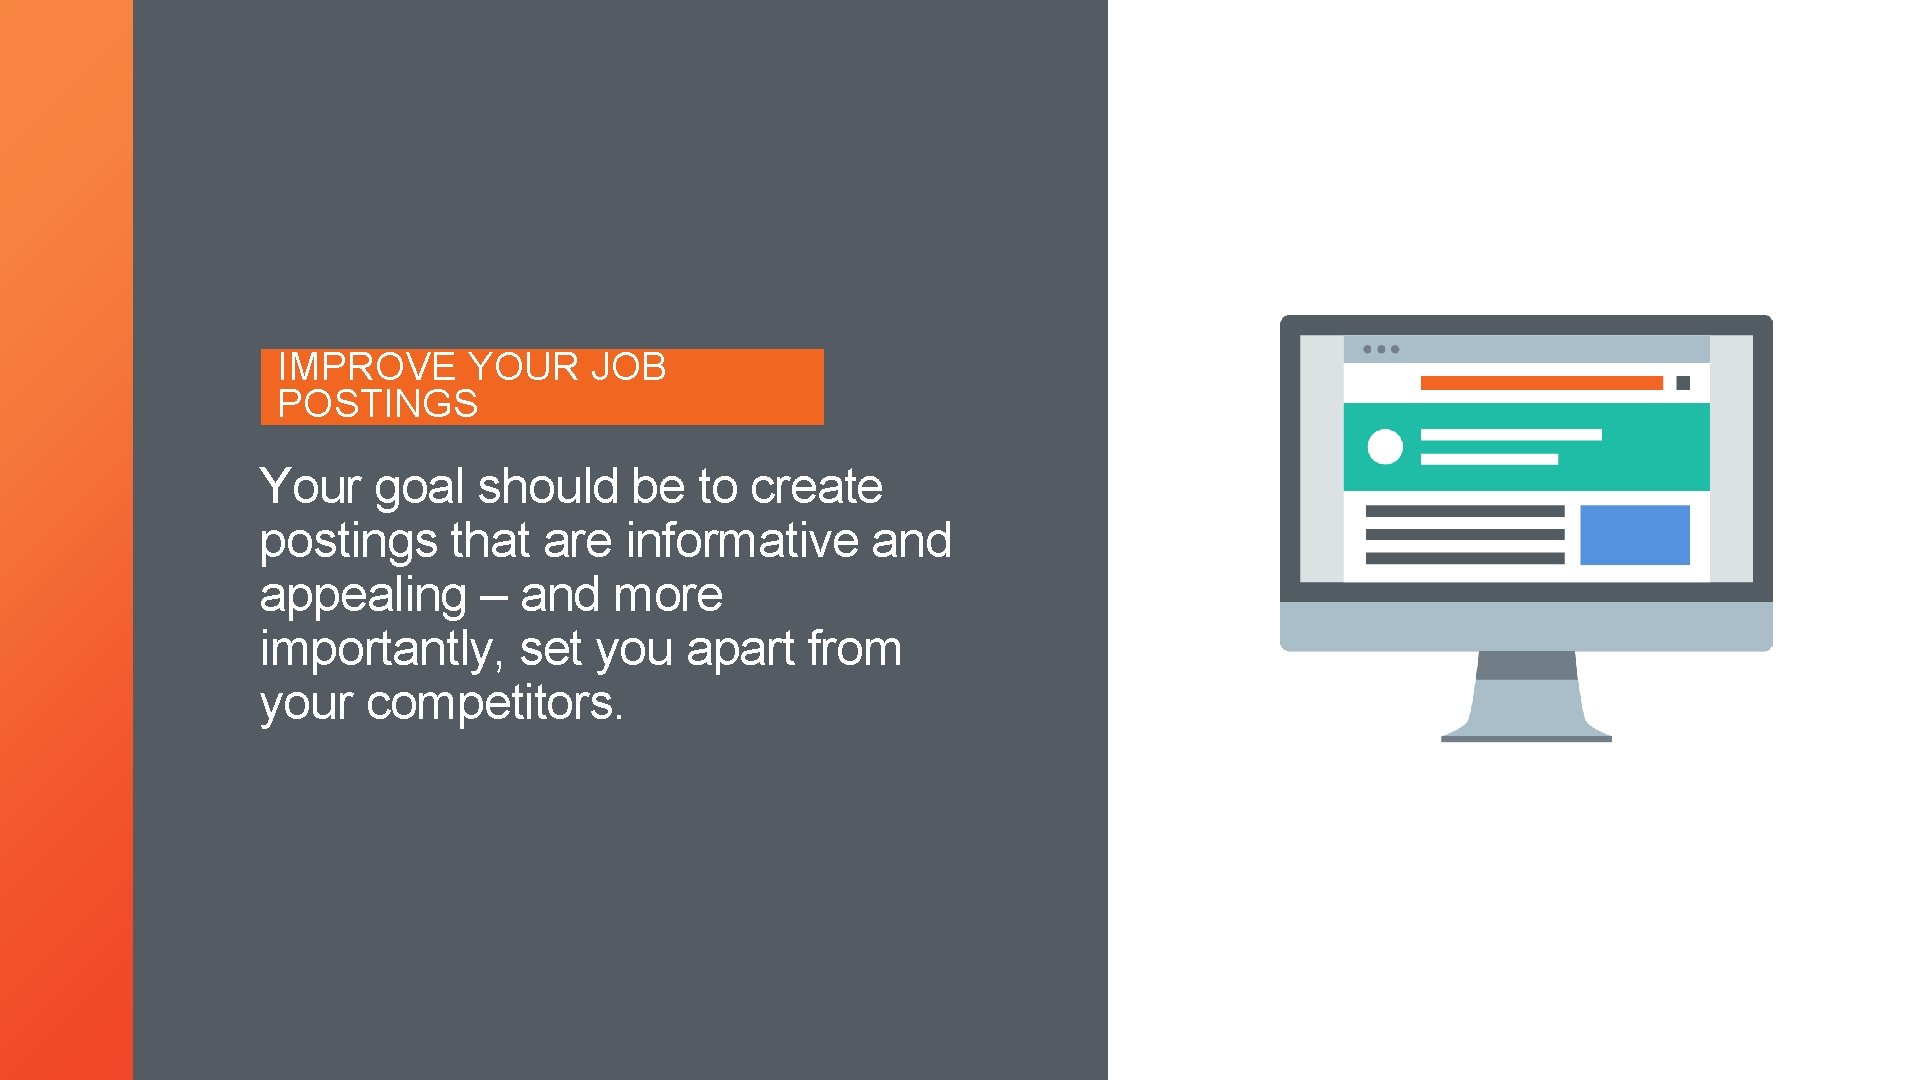 IMPROVE YOUR JOB POSTINGS Your goal should be to create postings that are informative